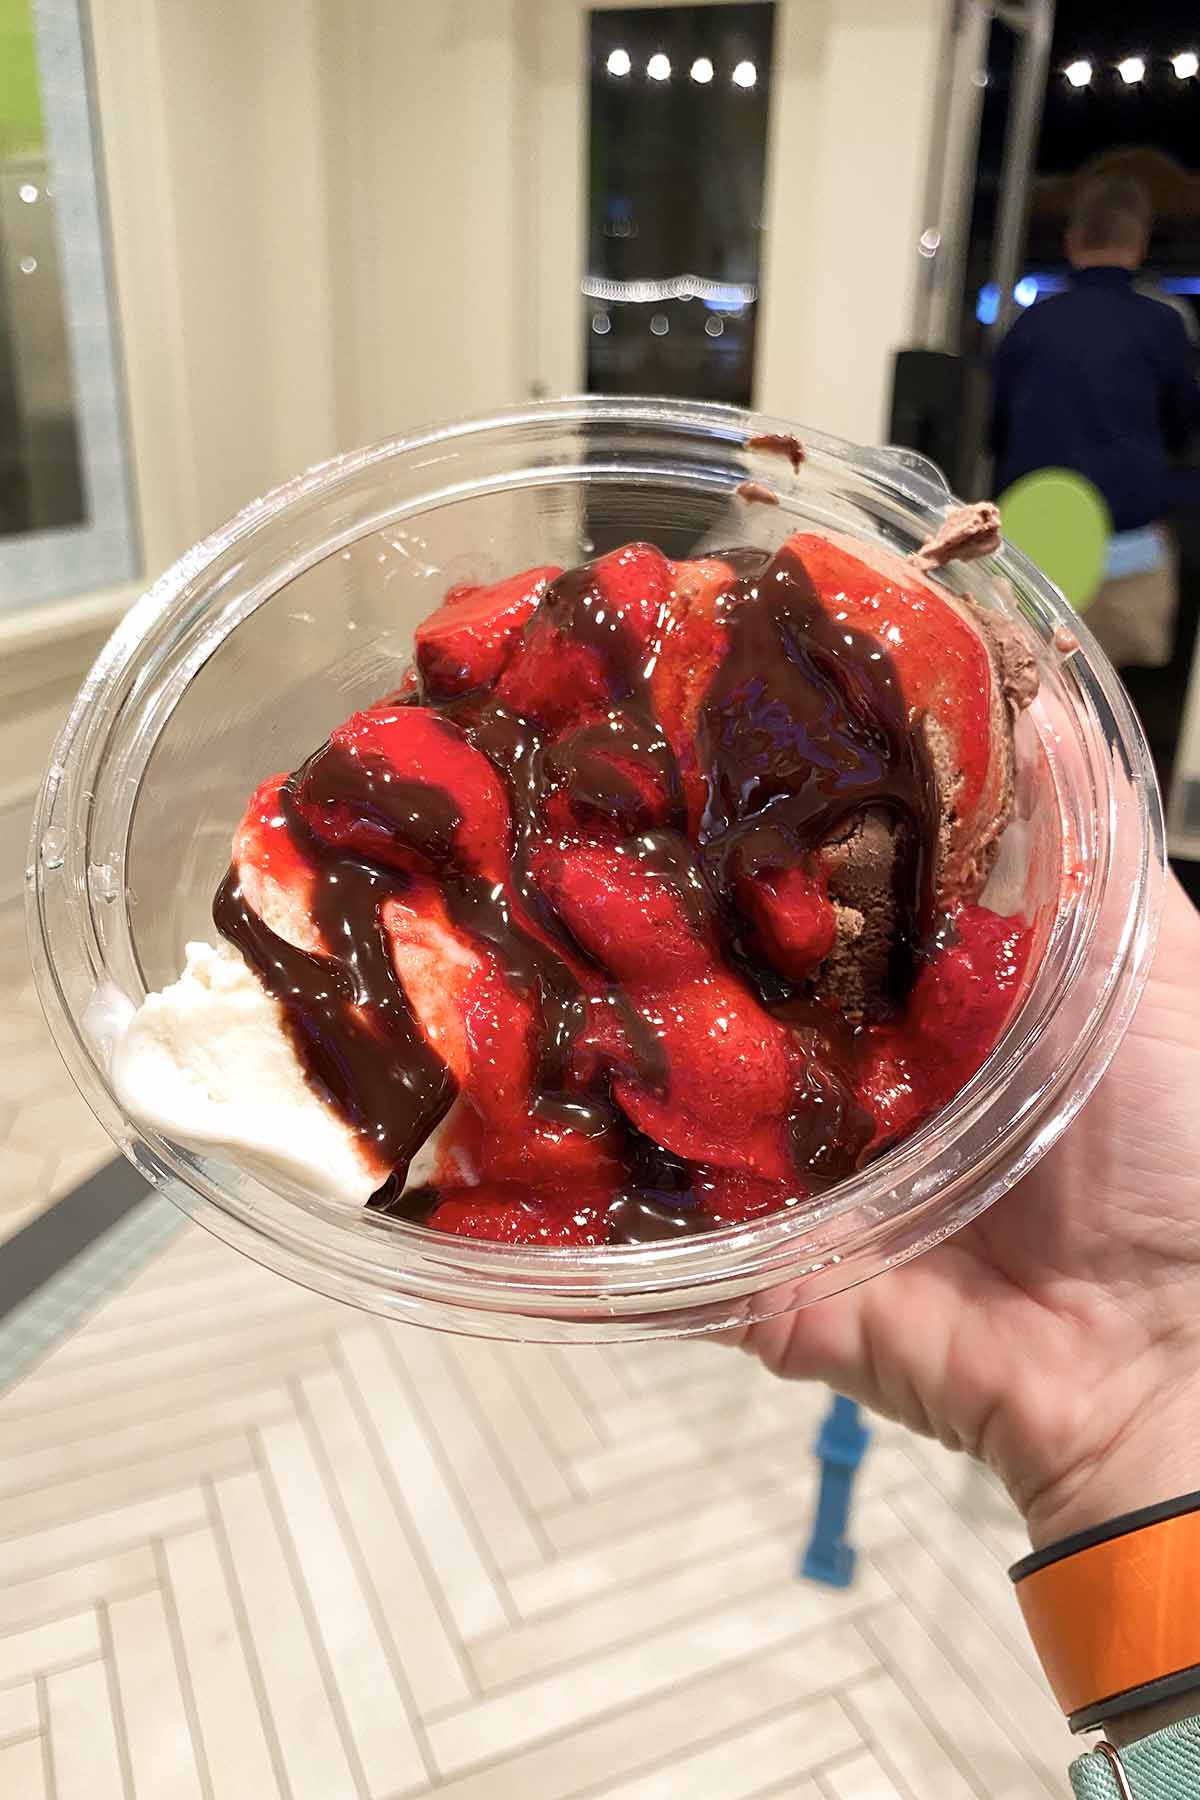 hand holding a sundae with chocolate sauce, strawberry syrup, and strawberry pieces on it